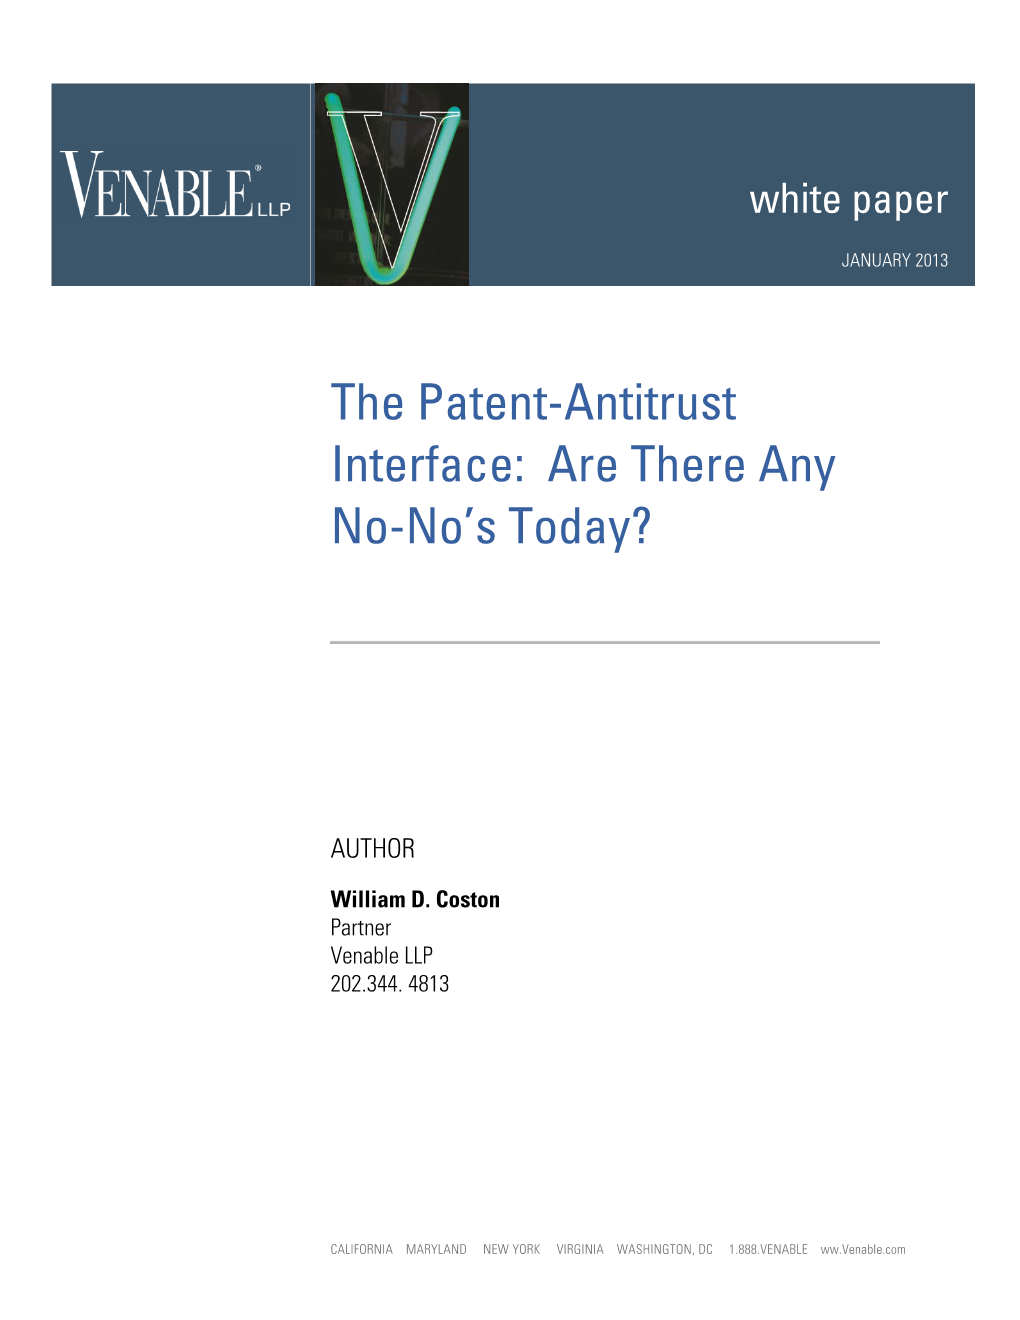 The Patent-Antitrust Interface: Are There Any No-No's Today?